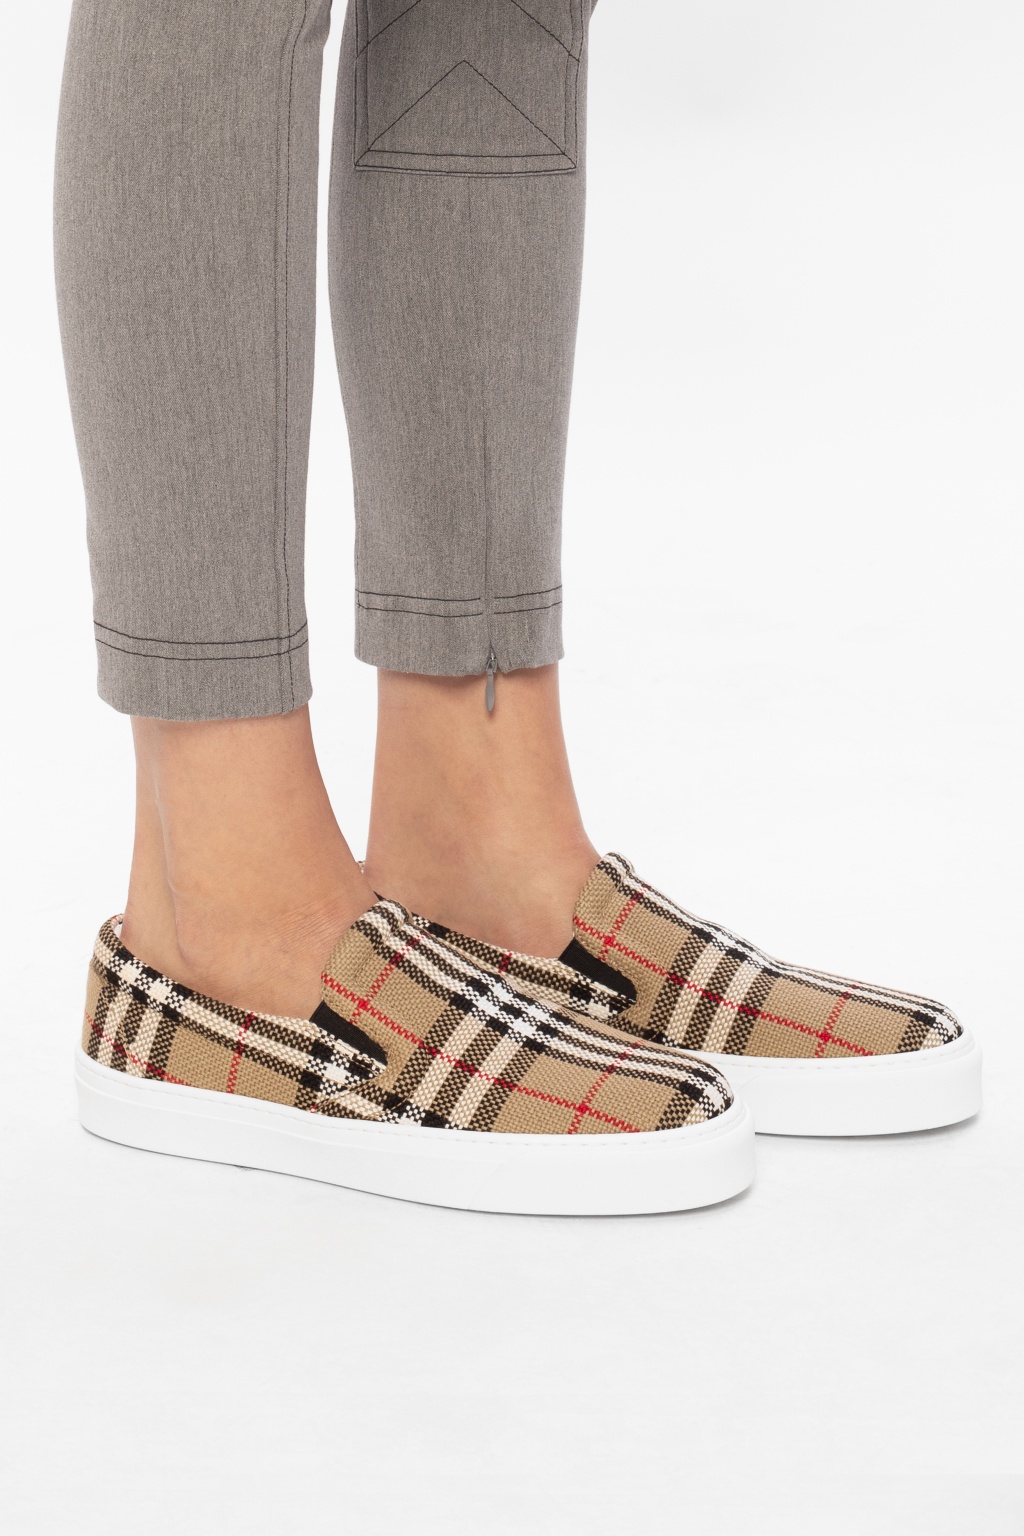 Burberry Patterned sneakers